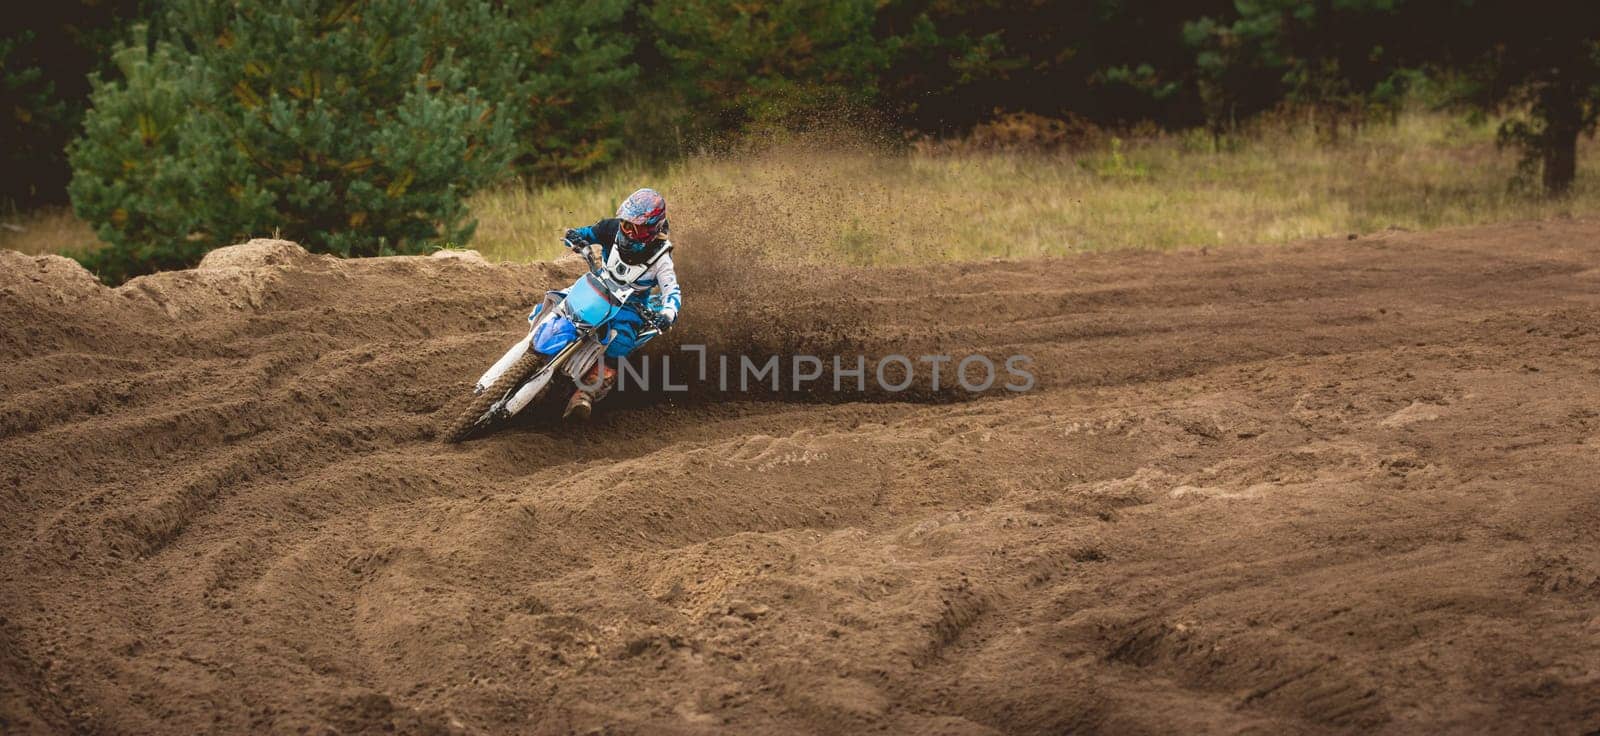 Moto cross - MX girl biker at race in Russia - a sharp turn and the spray of dirt, telephoto